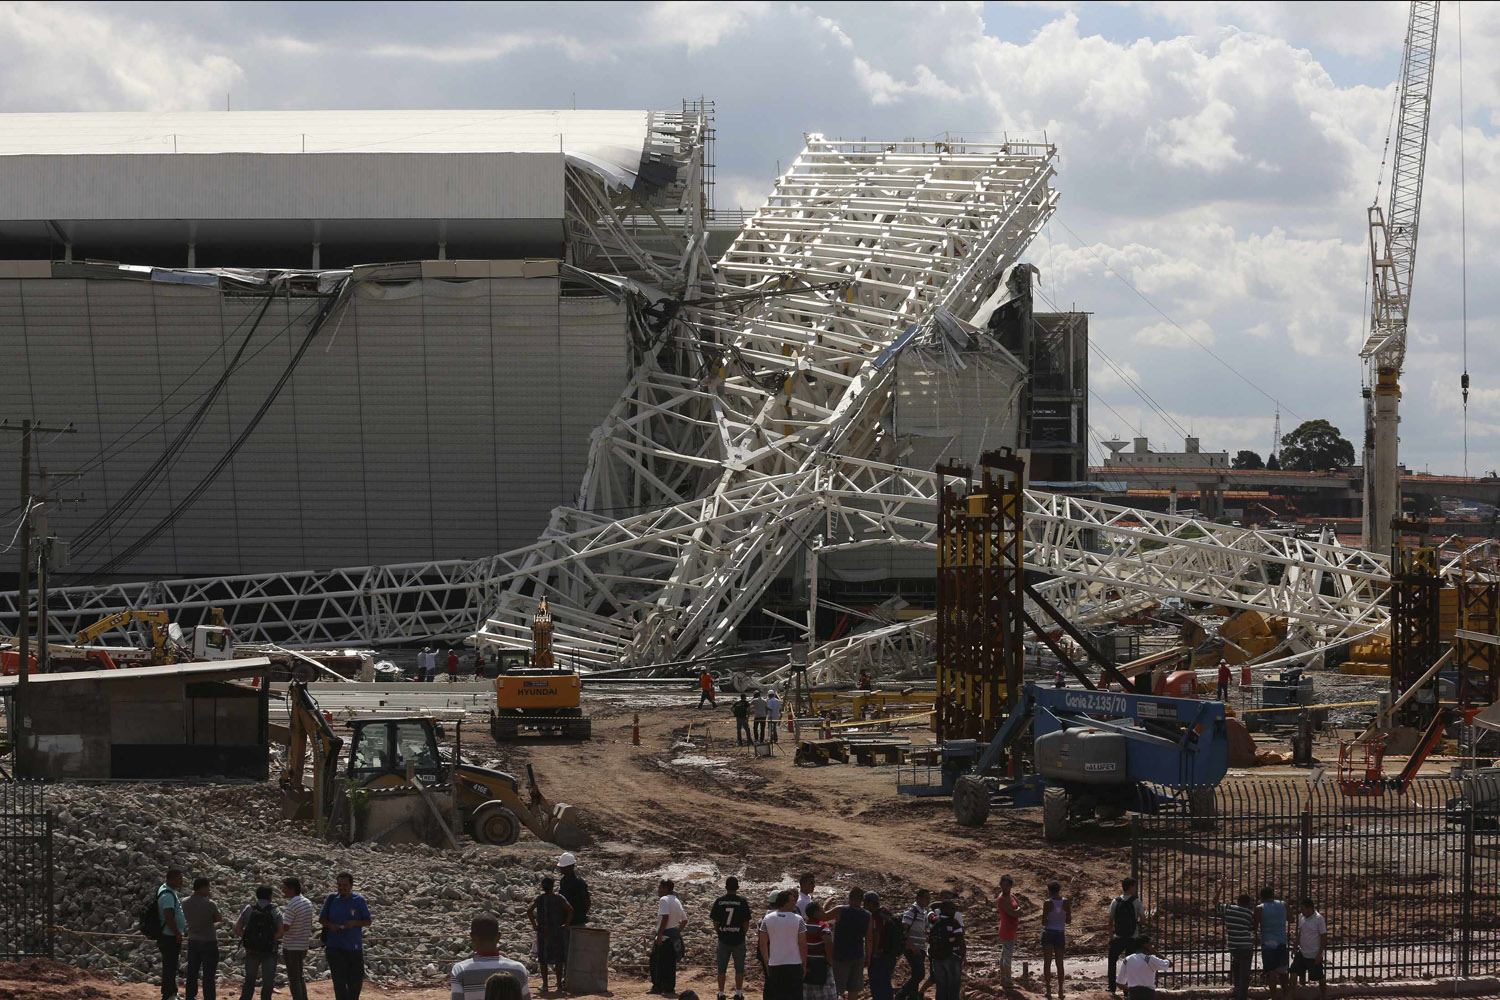 Nov. 27, 2013. Workers stand near a crane that collapsed, killing two people, on the site of the  Itaquerao  stadium, which will host the opening soccer match of the 2014 World Cup in Sao Paulo, Brazil,